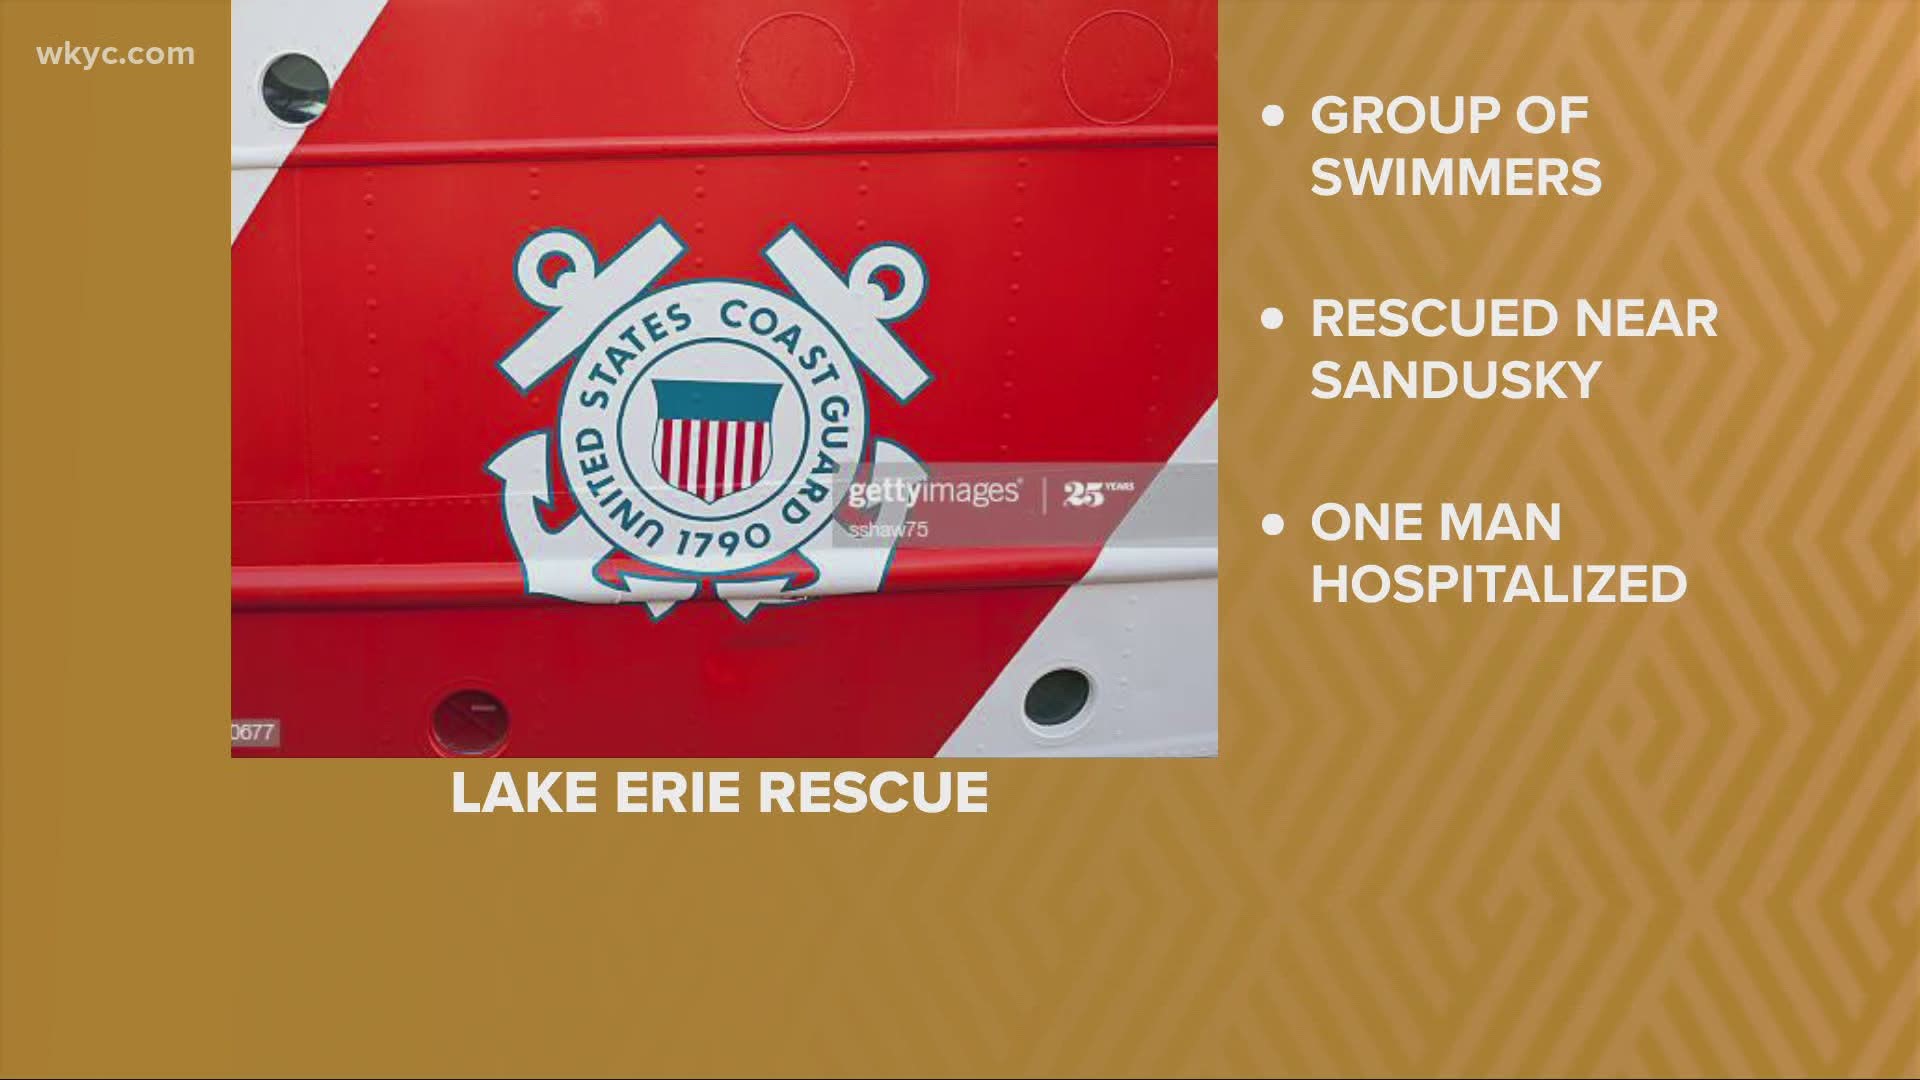 The water rescue situation took place in Lake Erie Saturday afternoon. A 29-year-old man was taken to an area hospital.